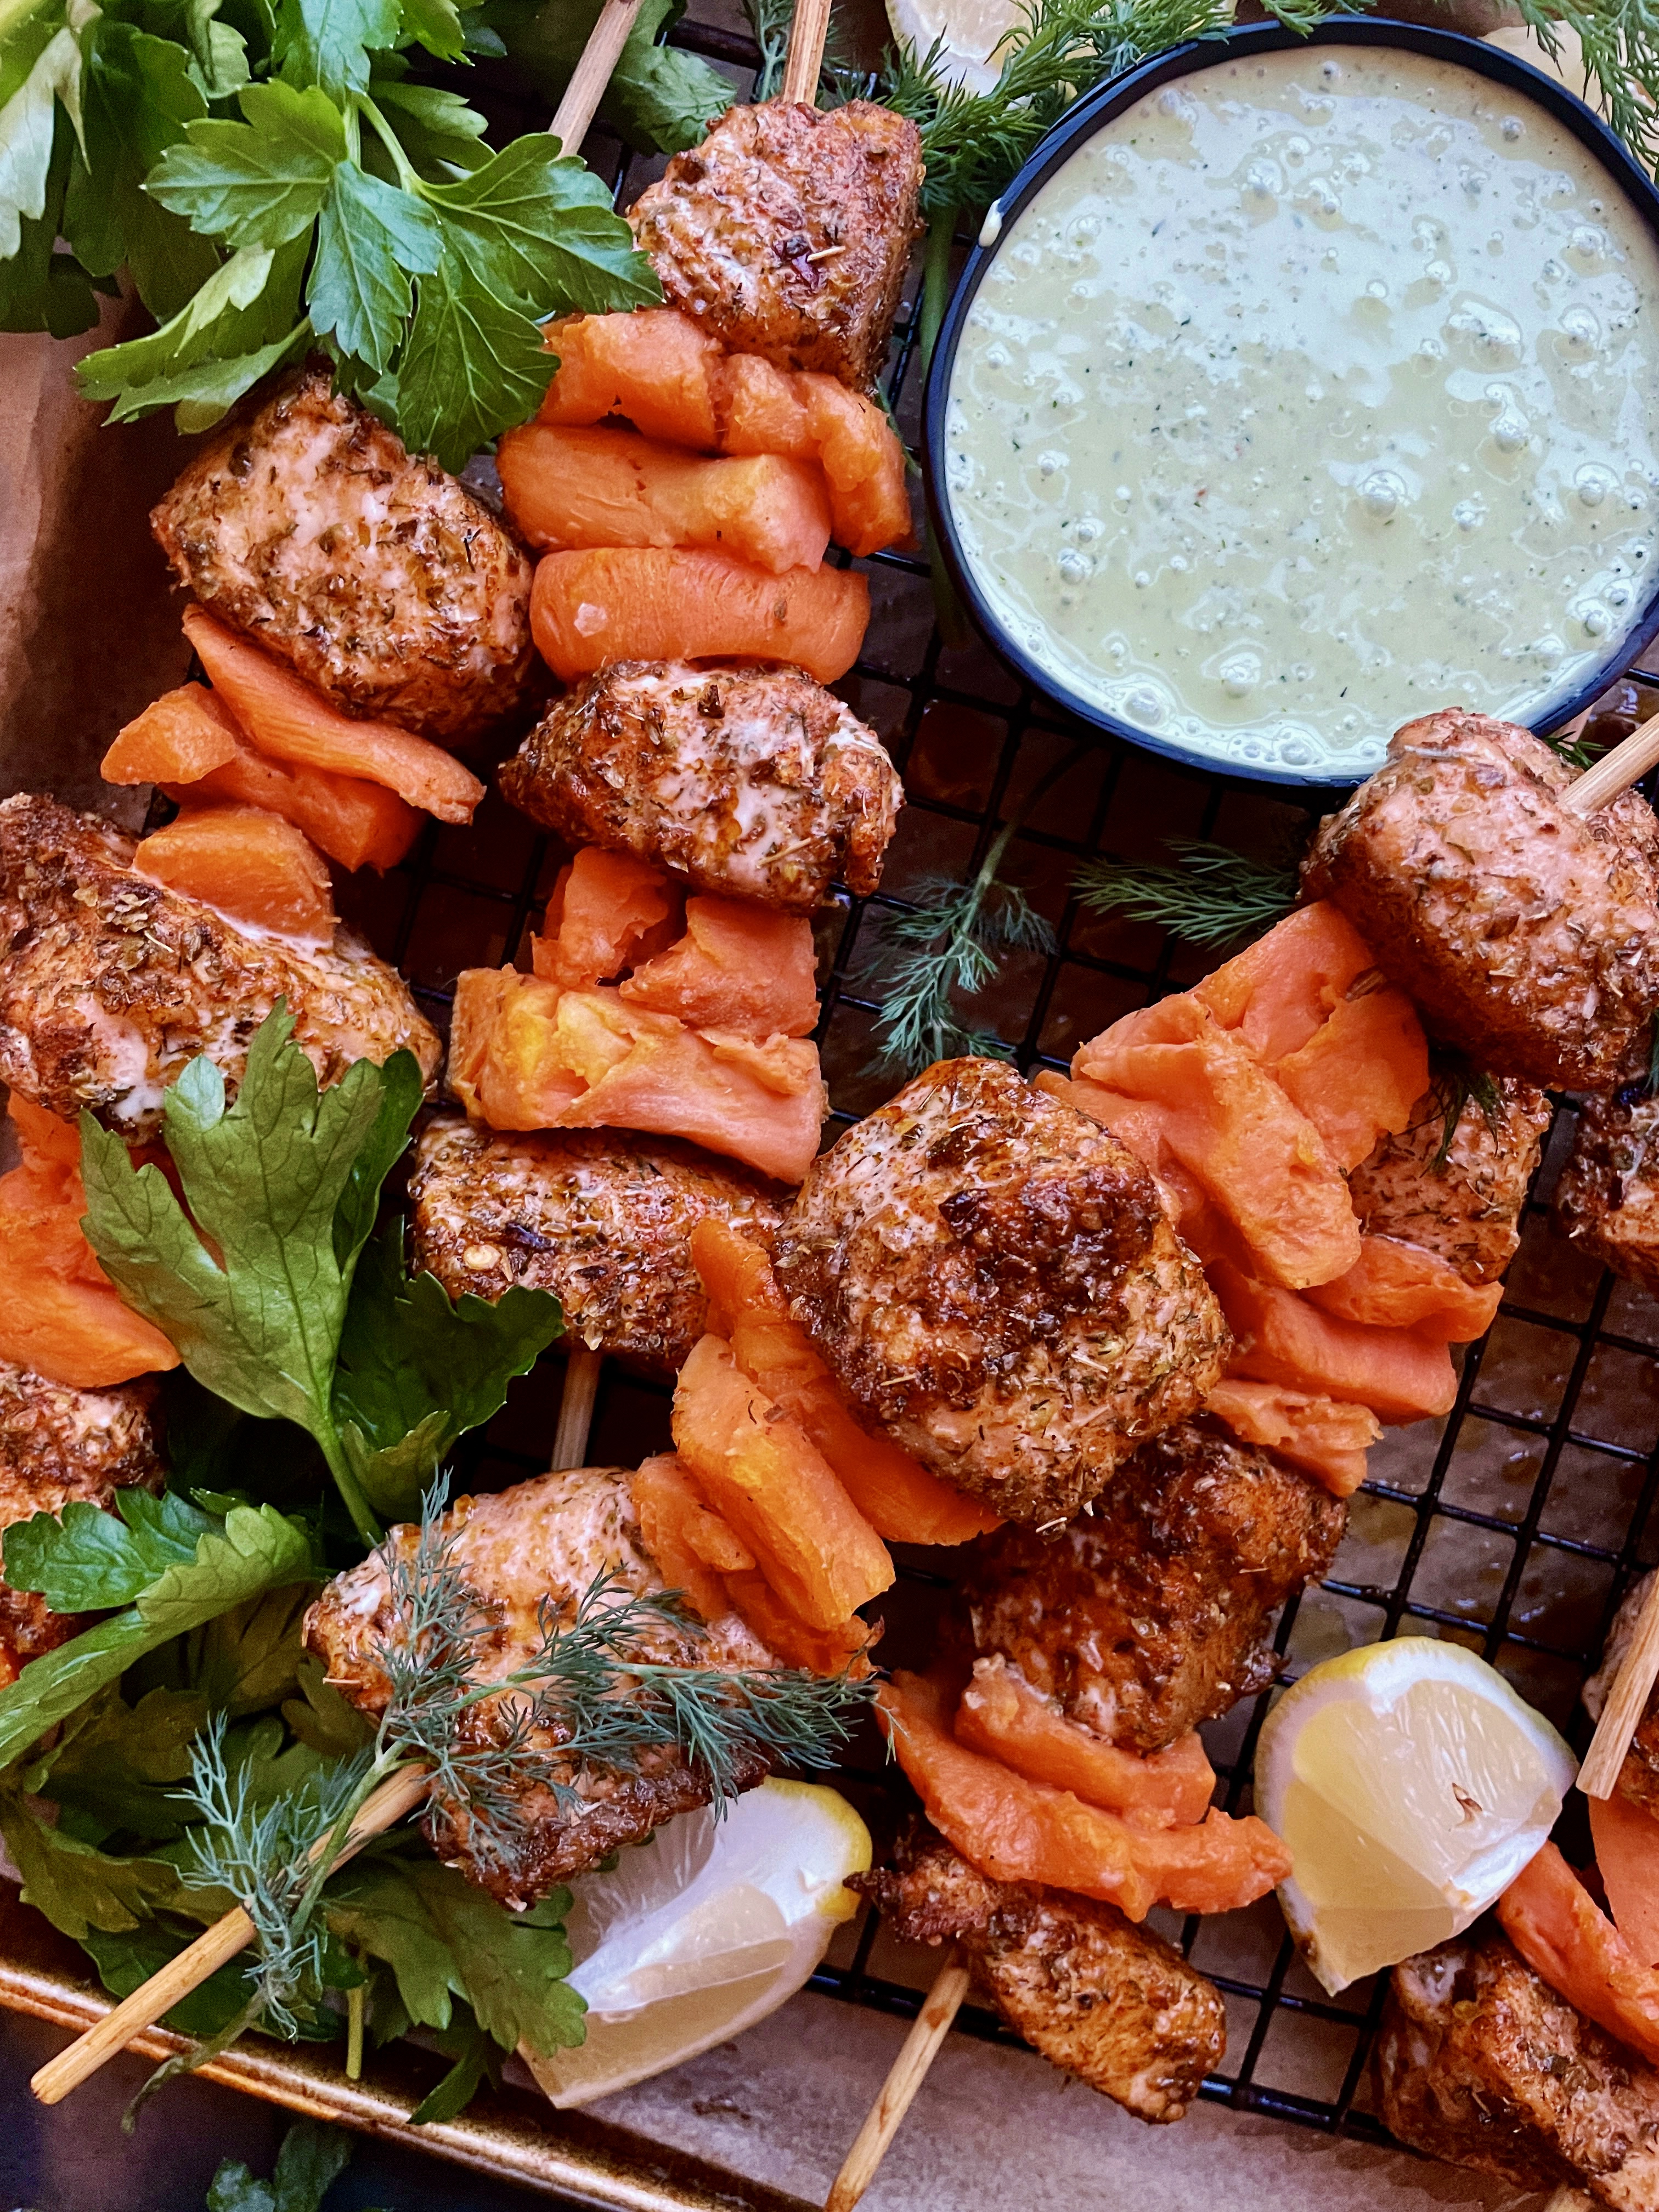 Crispy baked salmon layered with smashed sweet potato cubes and finished off with a lemony parsley dill yogurt: these Smashed Sweet Potato Salmon Skewers with Parsley Dill Sauce are an all time favorite recipe!